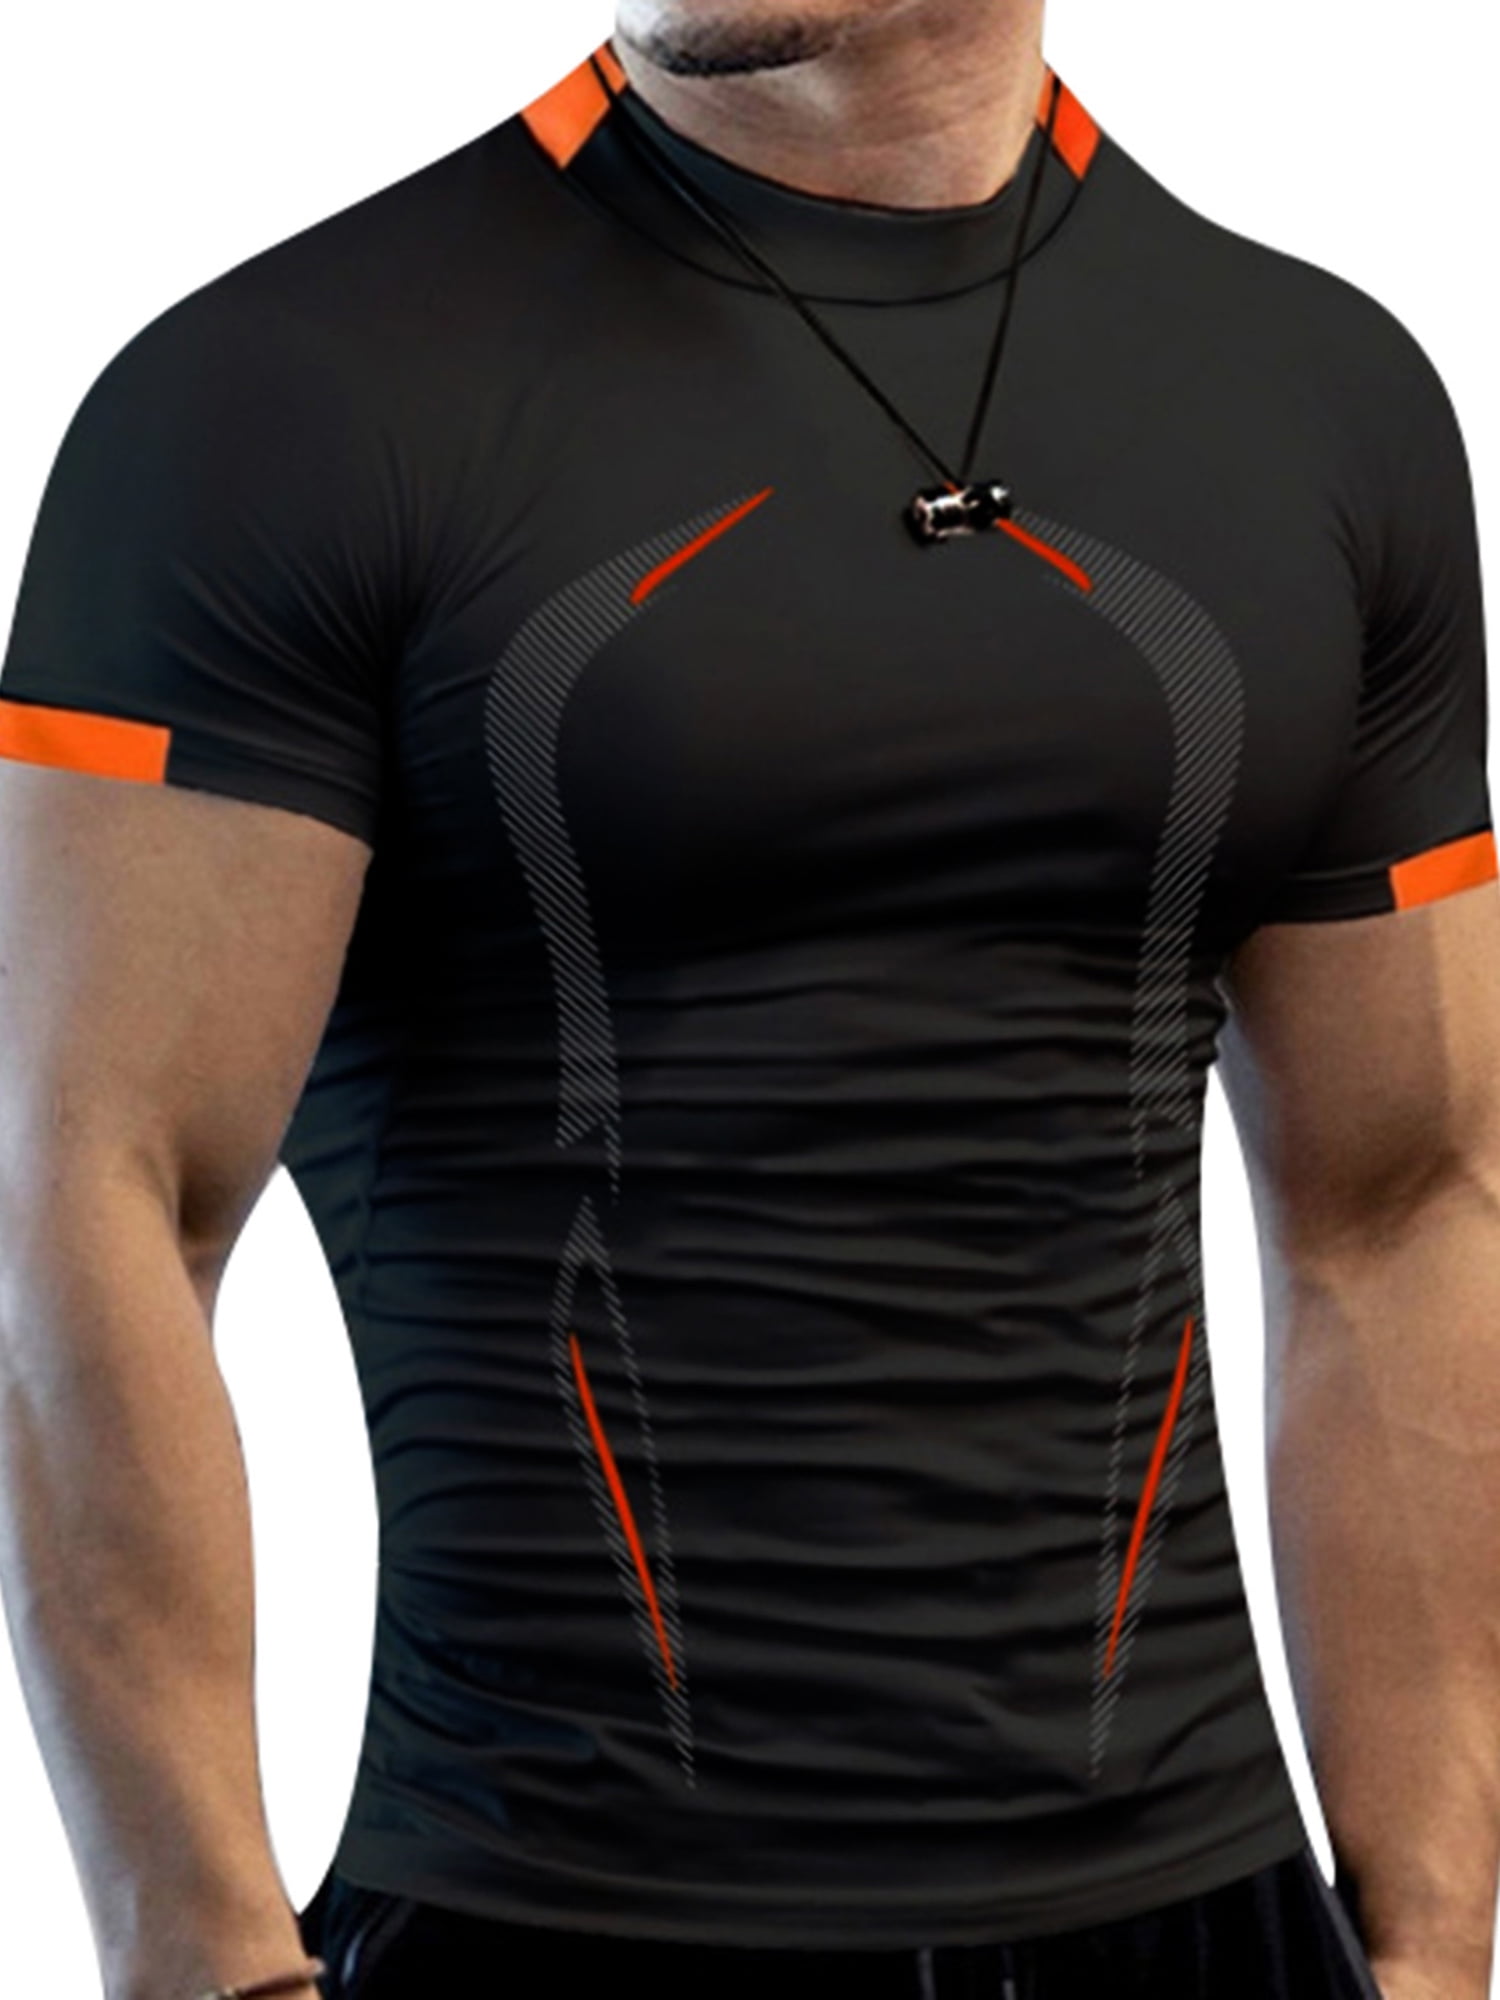 Running Sports Cimic Men's 3 Pack Workout Shirts Quick Dry Fit Short-Sleeve Gym T-Shirts Tops for Athletic 